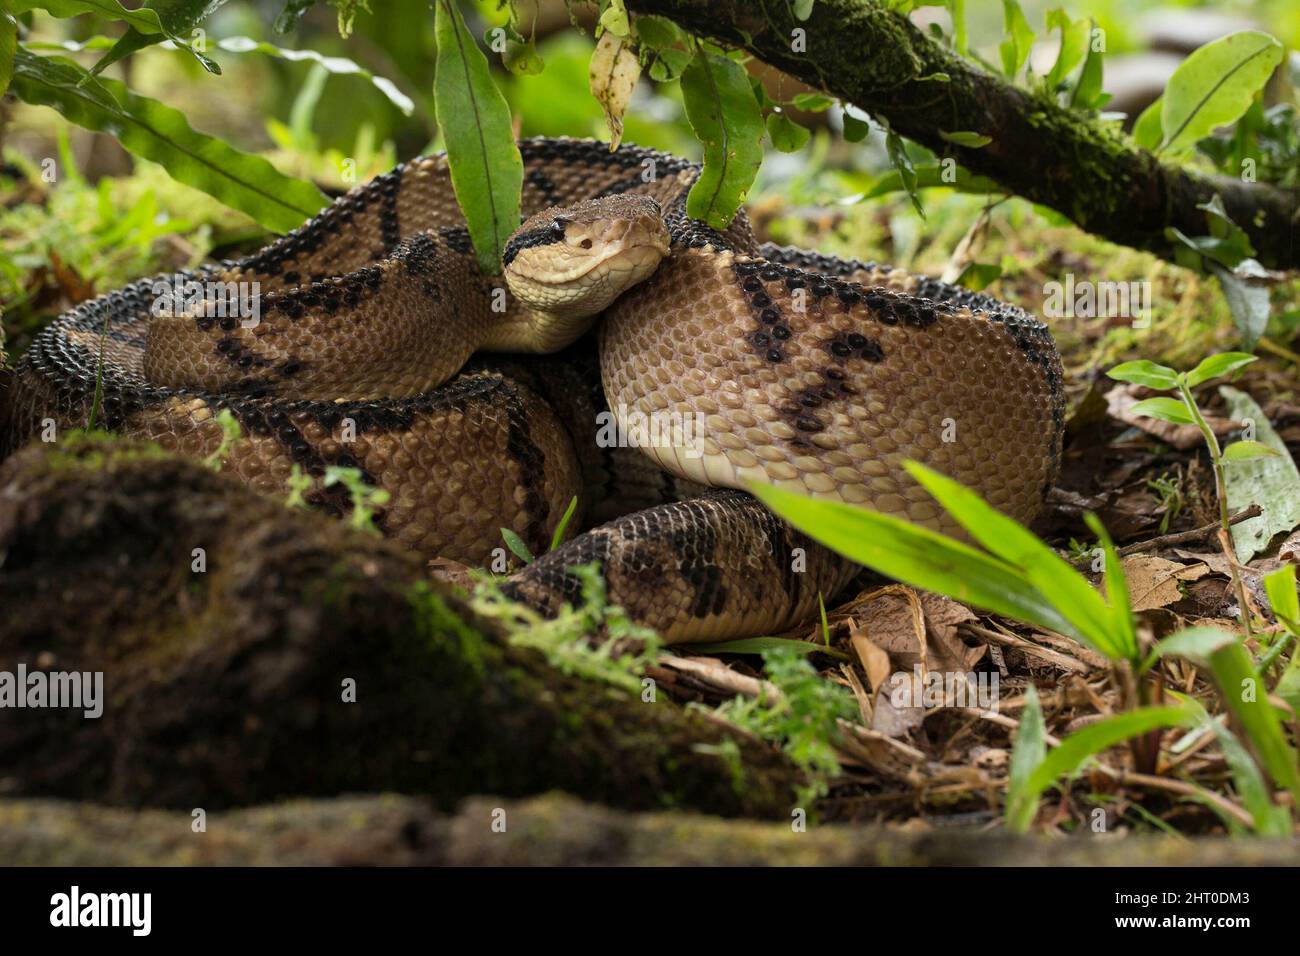 Central American bushmaster (Lachesis stenophrys) in leaf litter. A long (to 2.5 m) and dangerous snake. Arenal Volcano, Costa Rica Stock Photo